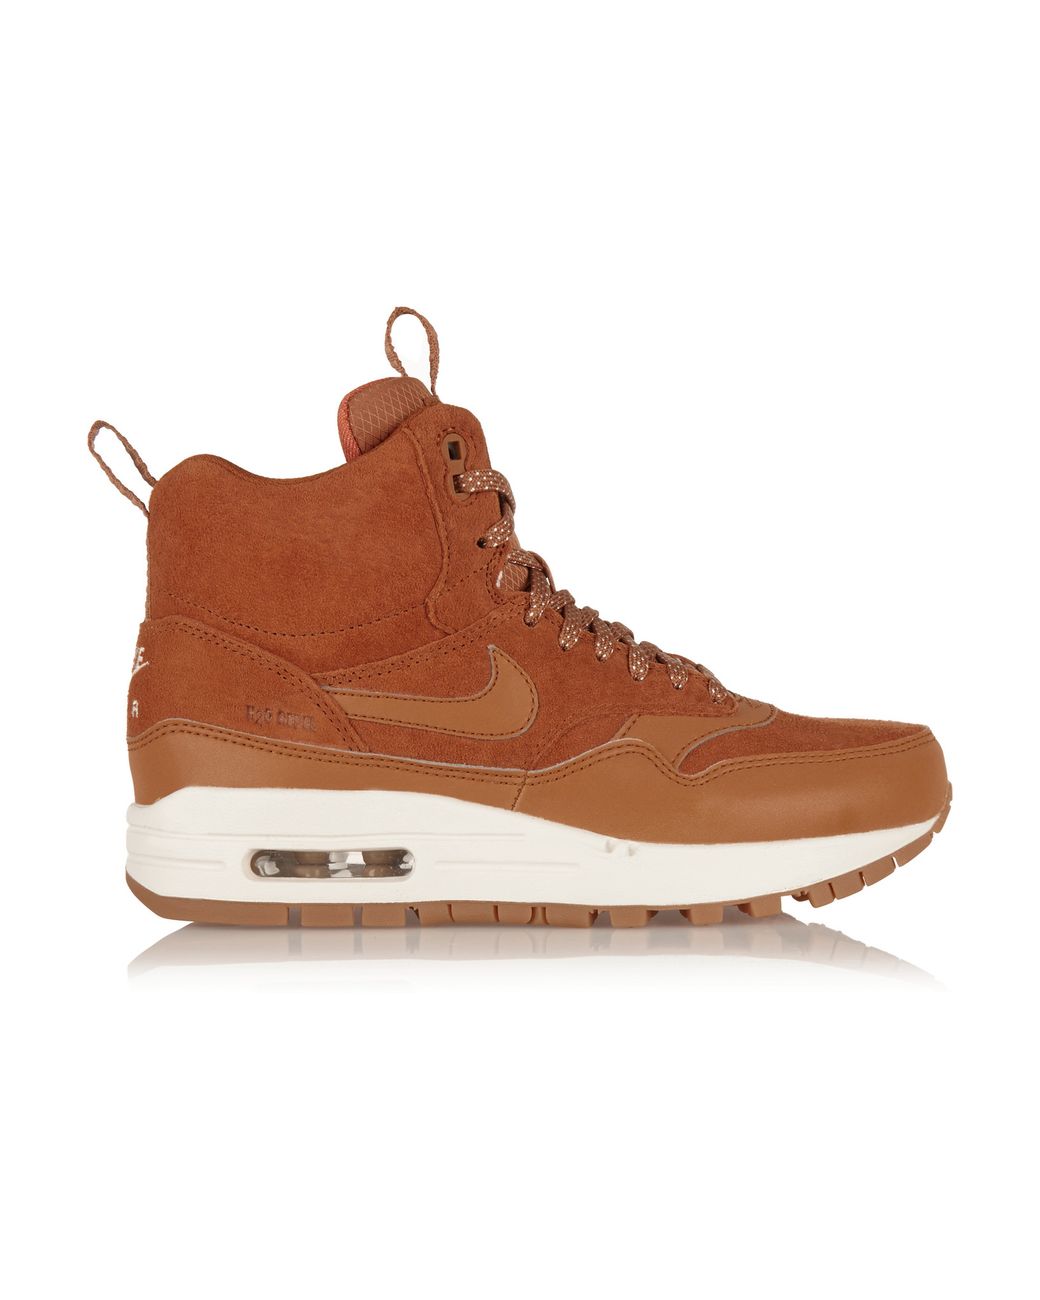 religie huis vreemd Nike - Air Max 1 Suede And Leather High-top Sneakers - Tan in Brown | Lyst